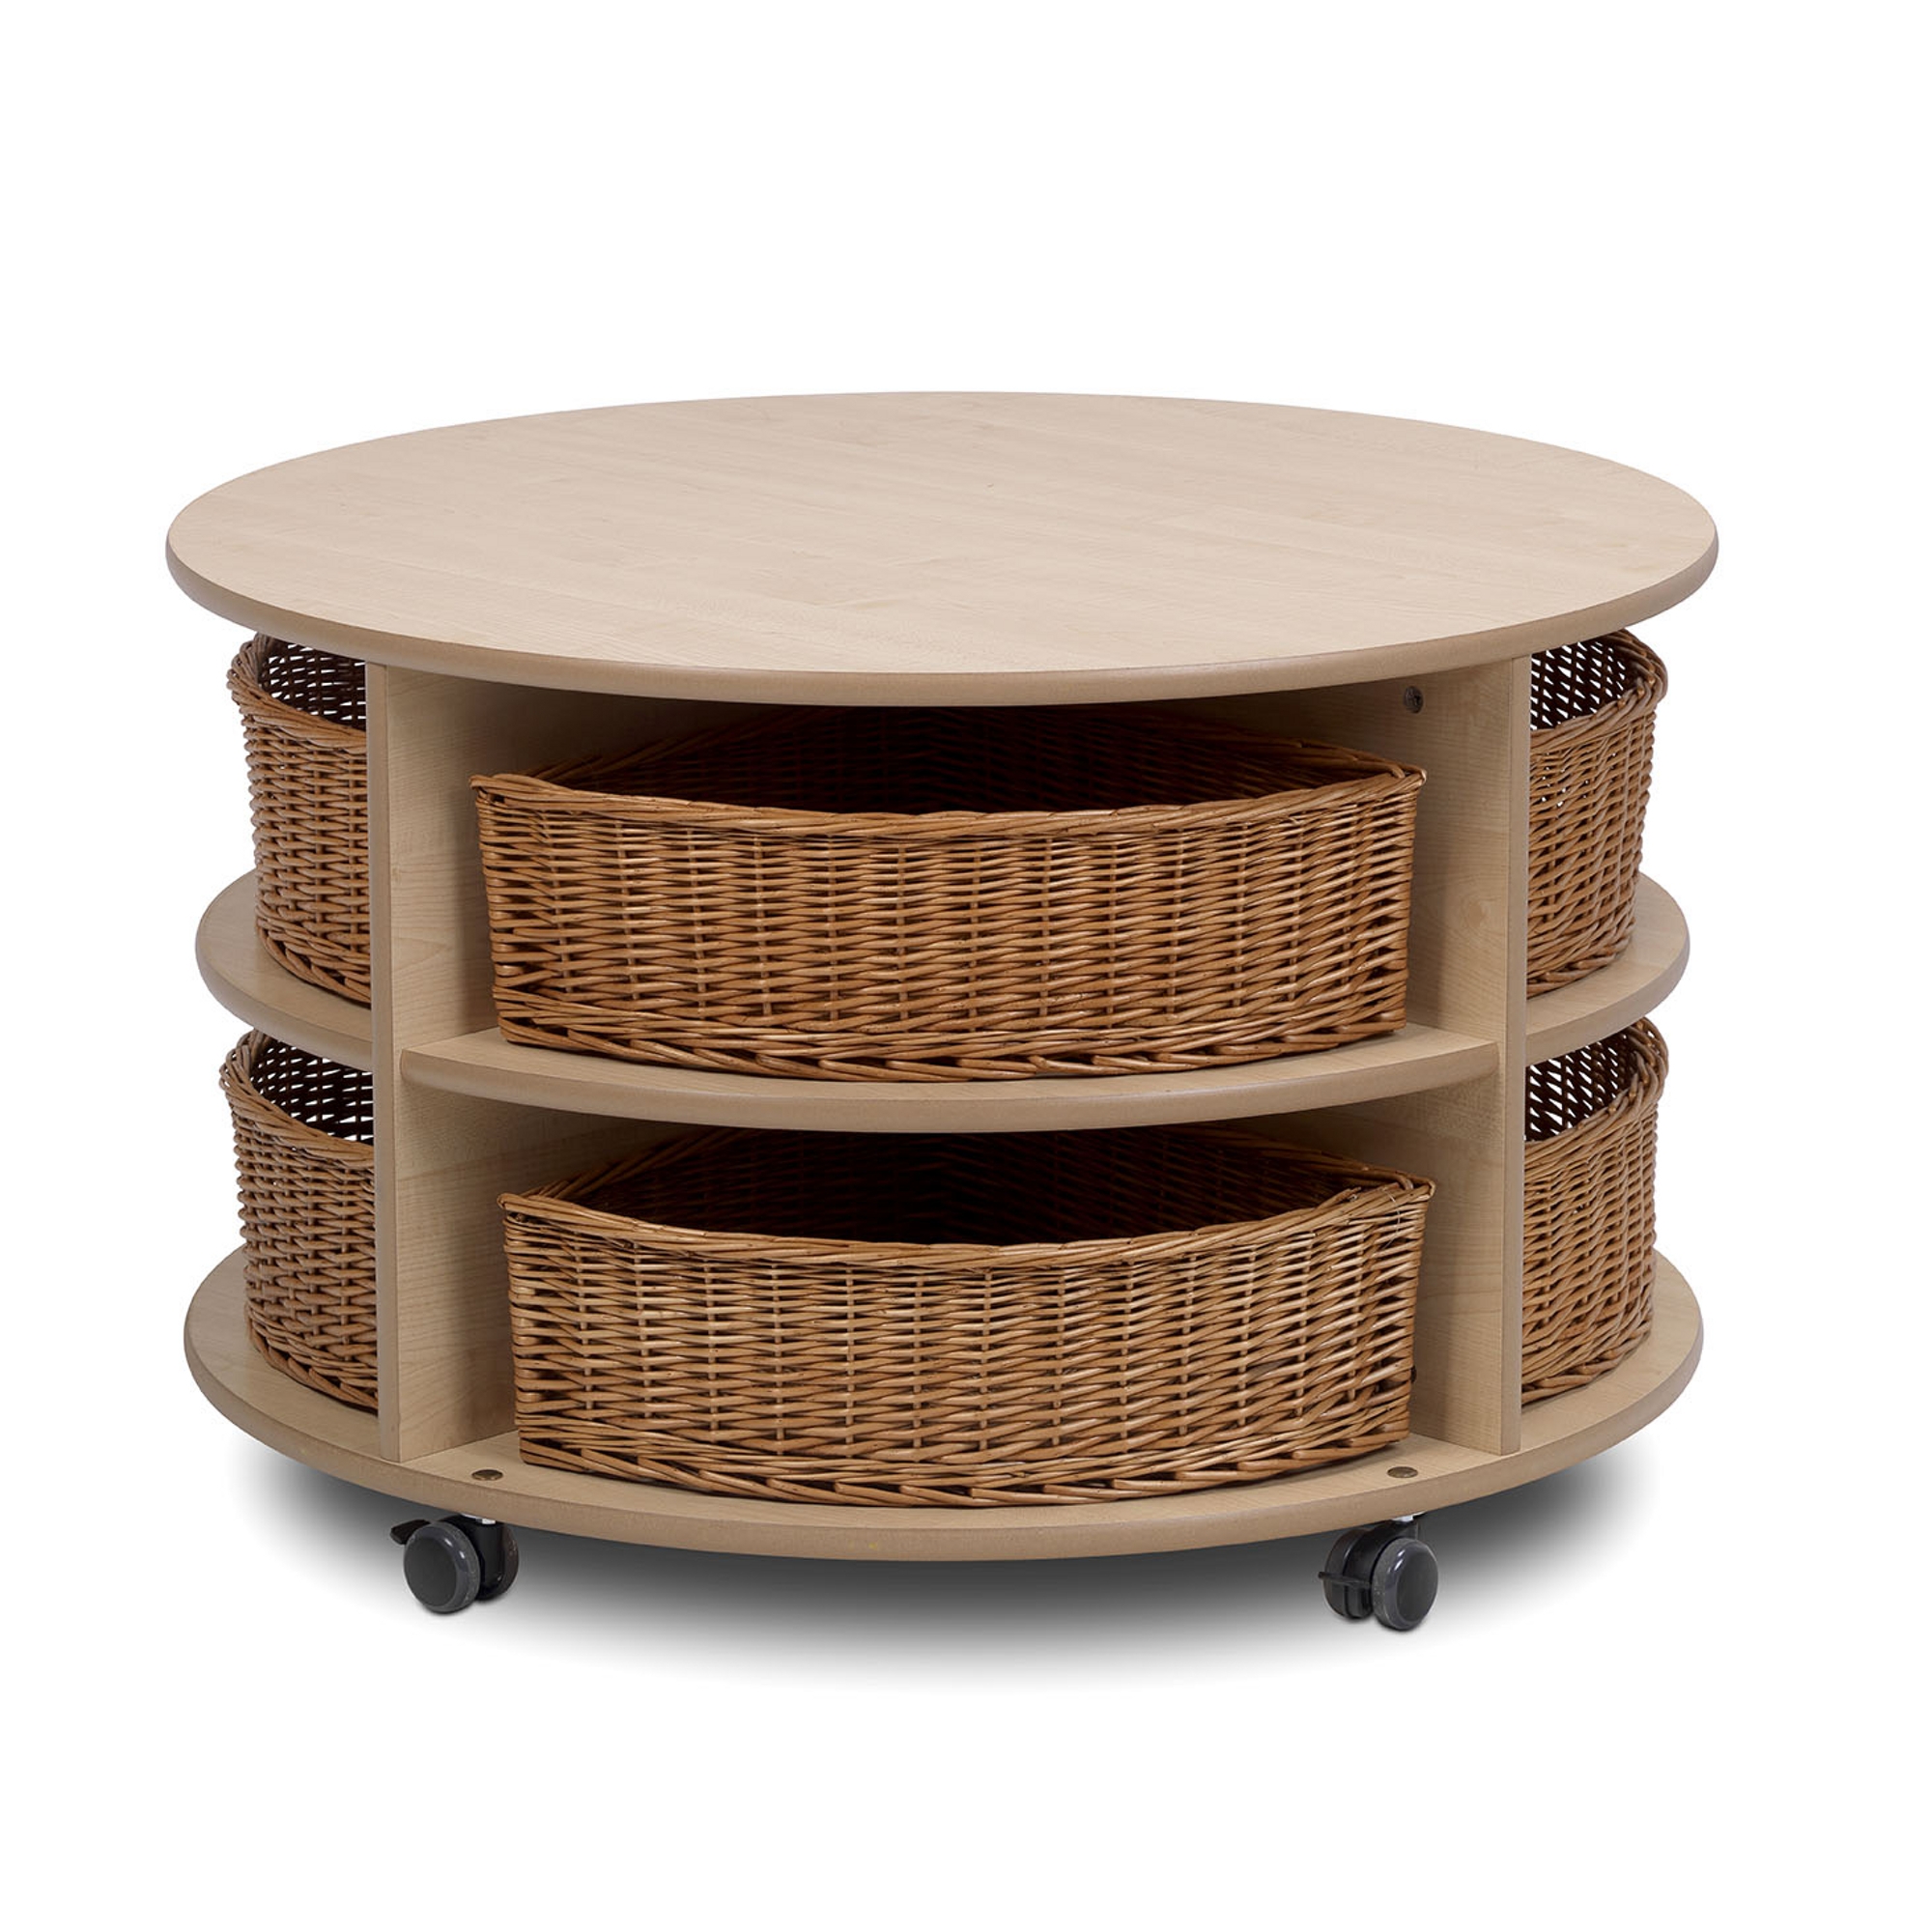 Playscapes Circular Storage Unit and Wicker Baskets